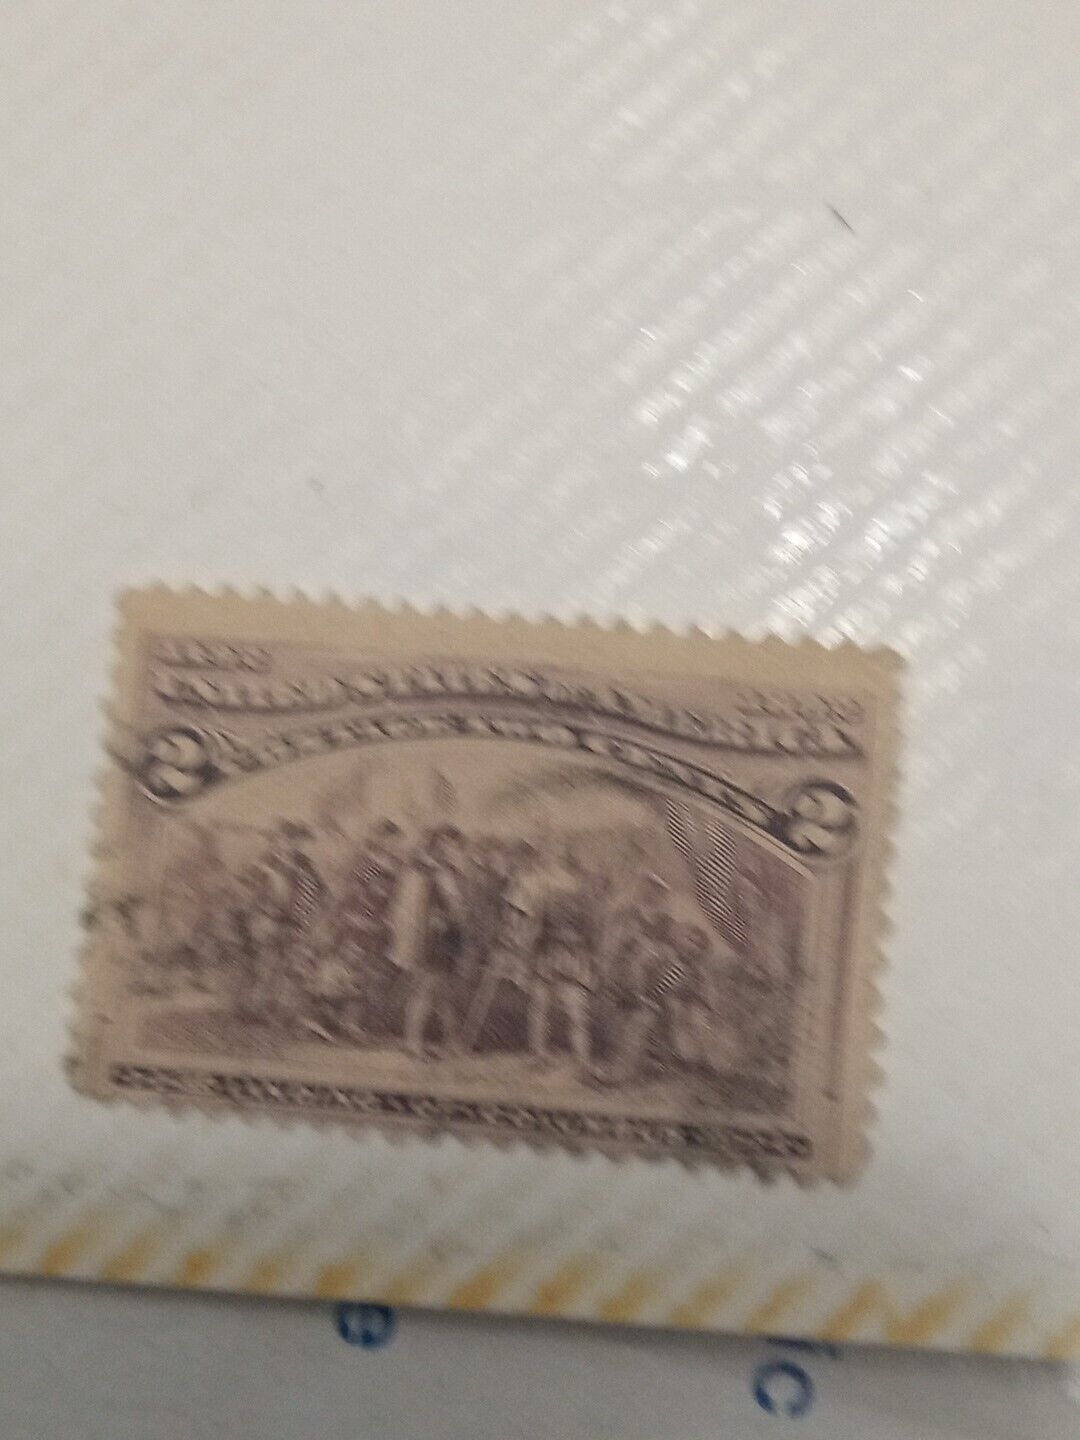 Vintage 1892 WORLD\'S COLUMBIAN EXPOSITION CHICAGO Stamp 2 Cents unused 